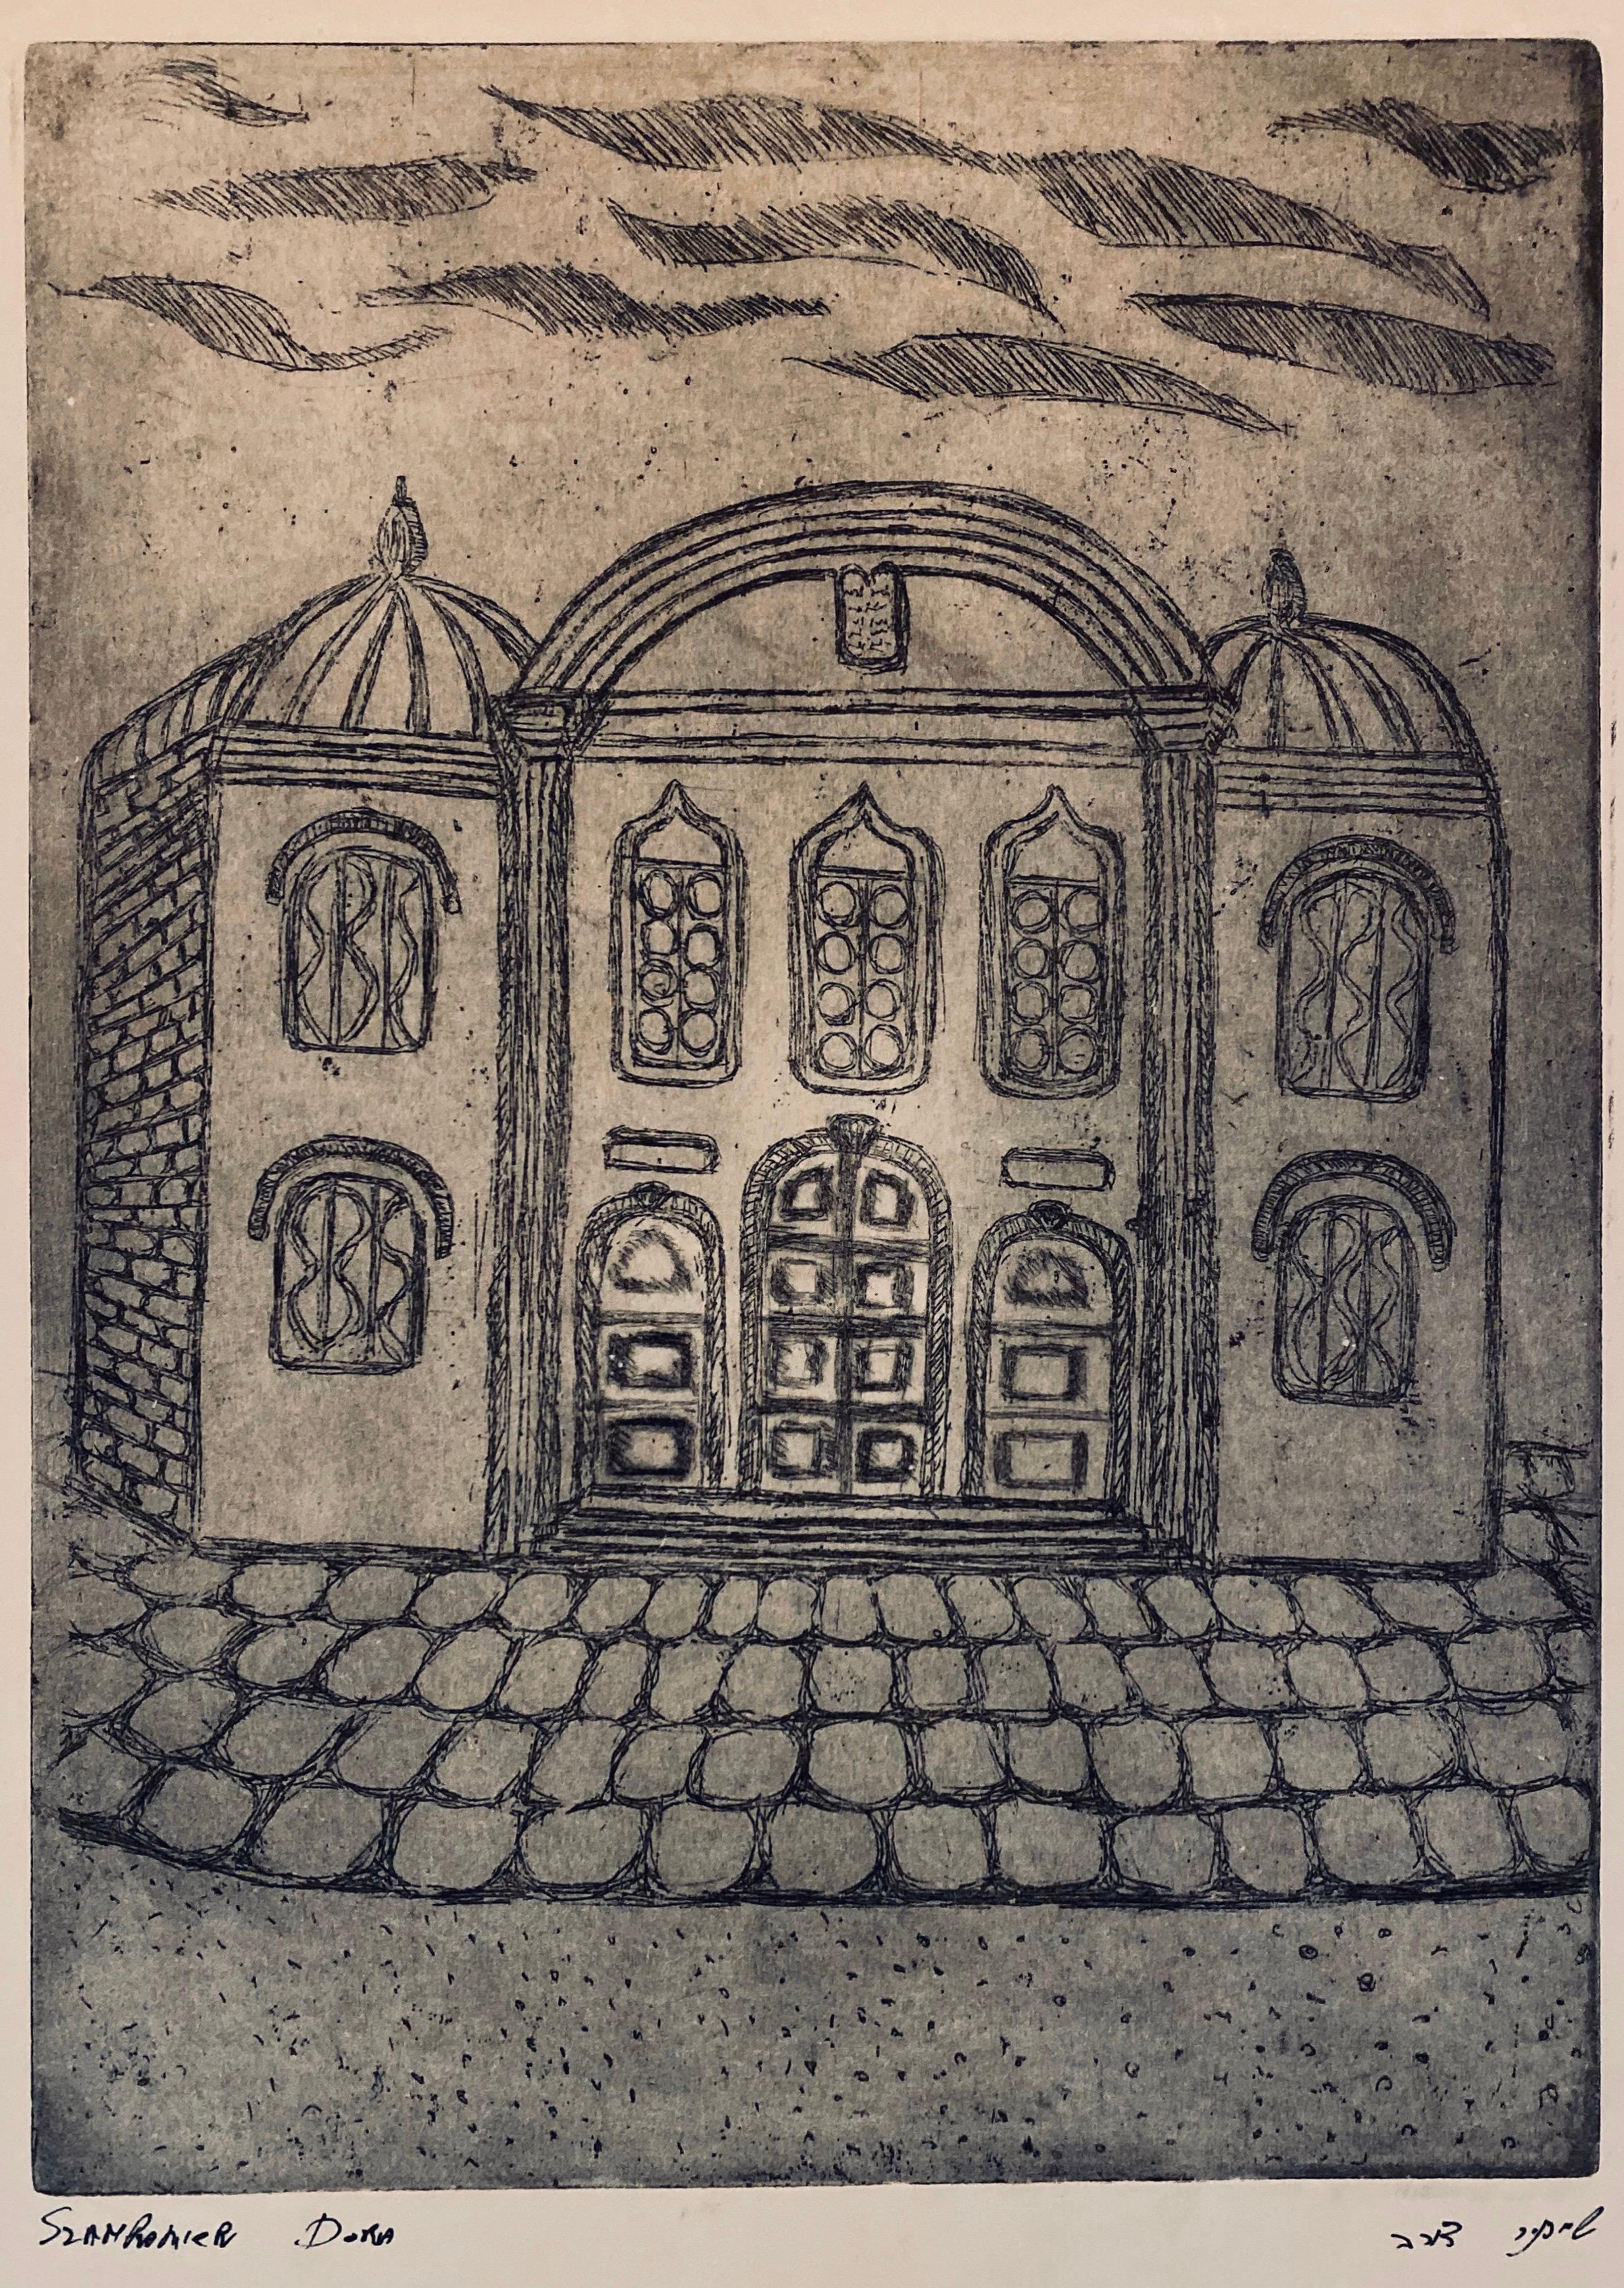 Etching of destroyed synagogue - Bialistok, Poland 